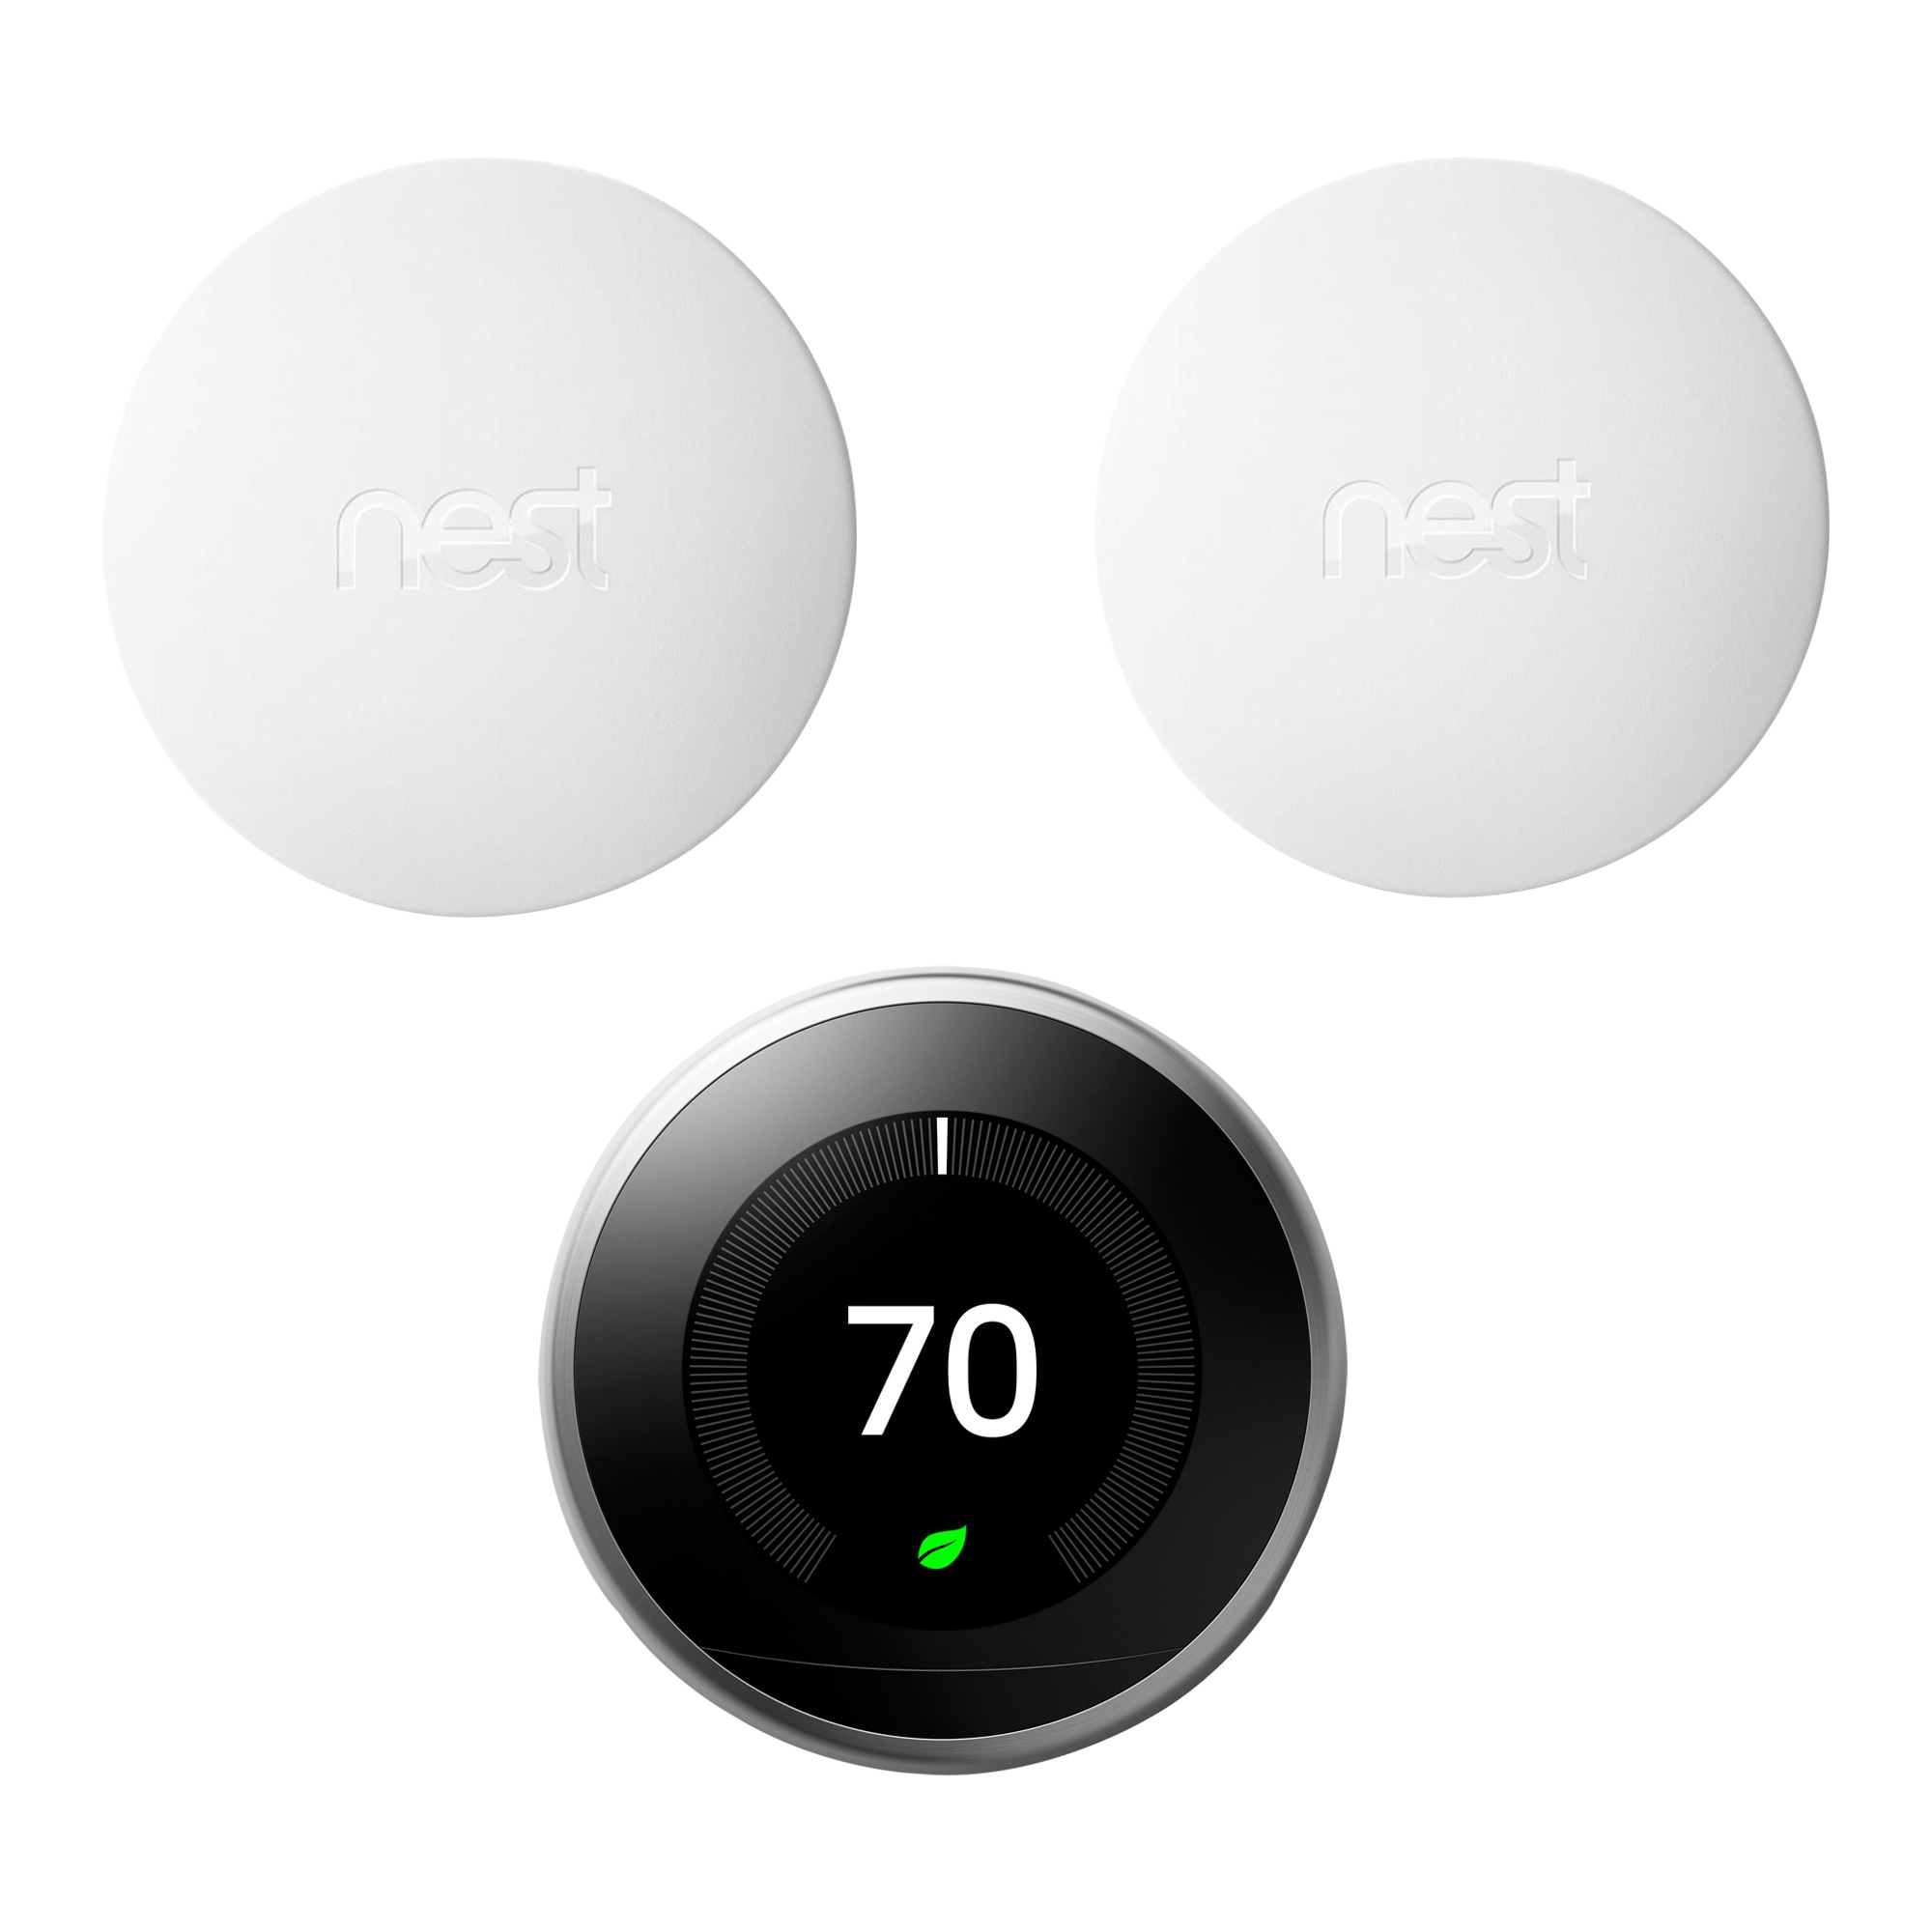 Google Google Nest Learning Thermostat 3rd Gen in Stainless Steel and Google Nest Temperature Sensor 2pk Bundle